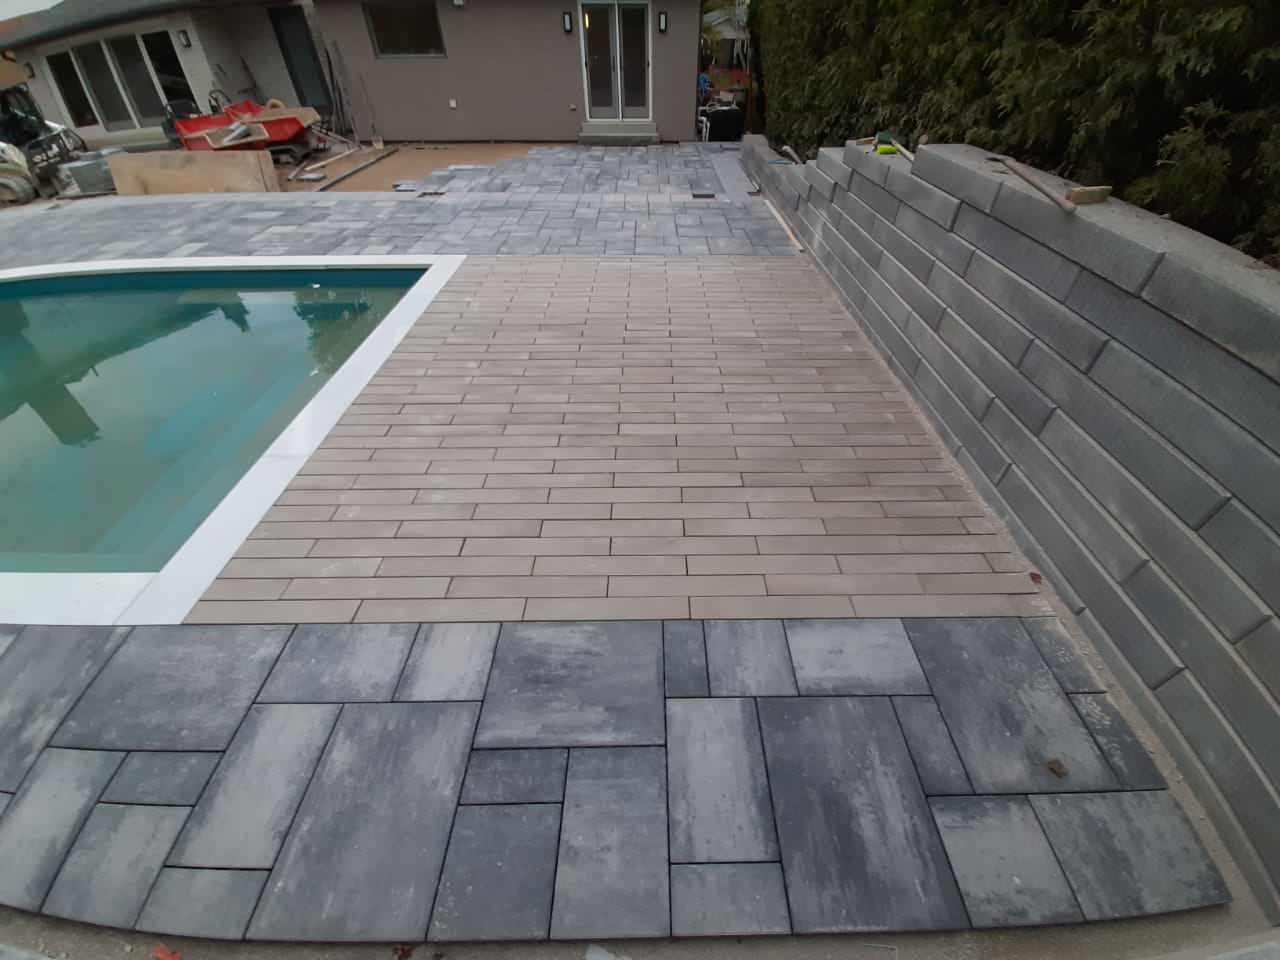 Bayview Staycation Pool Project